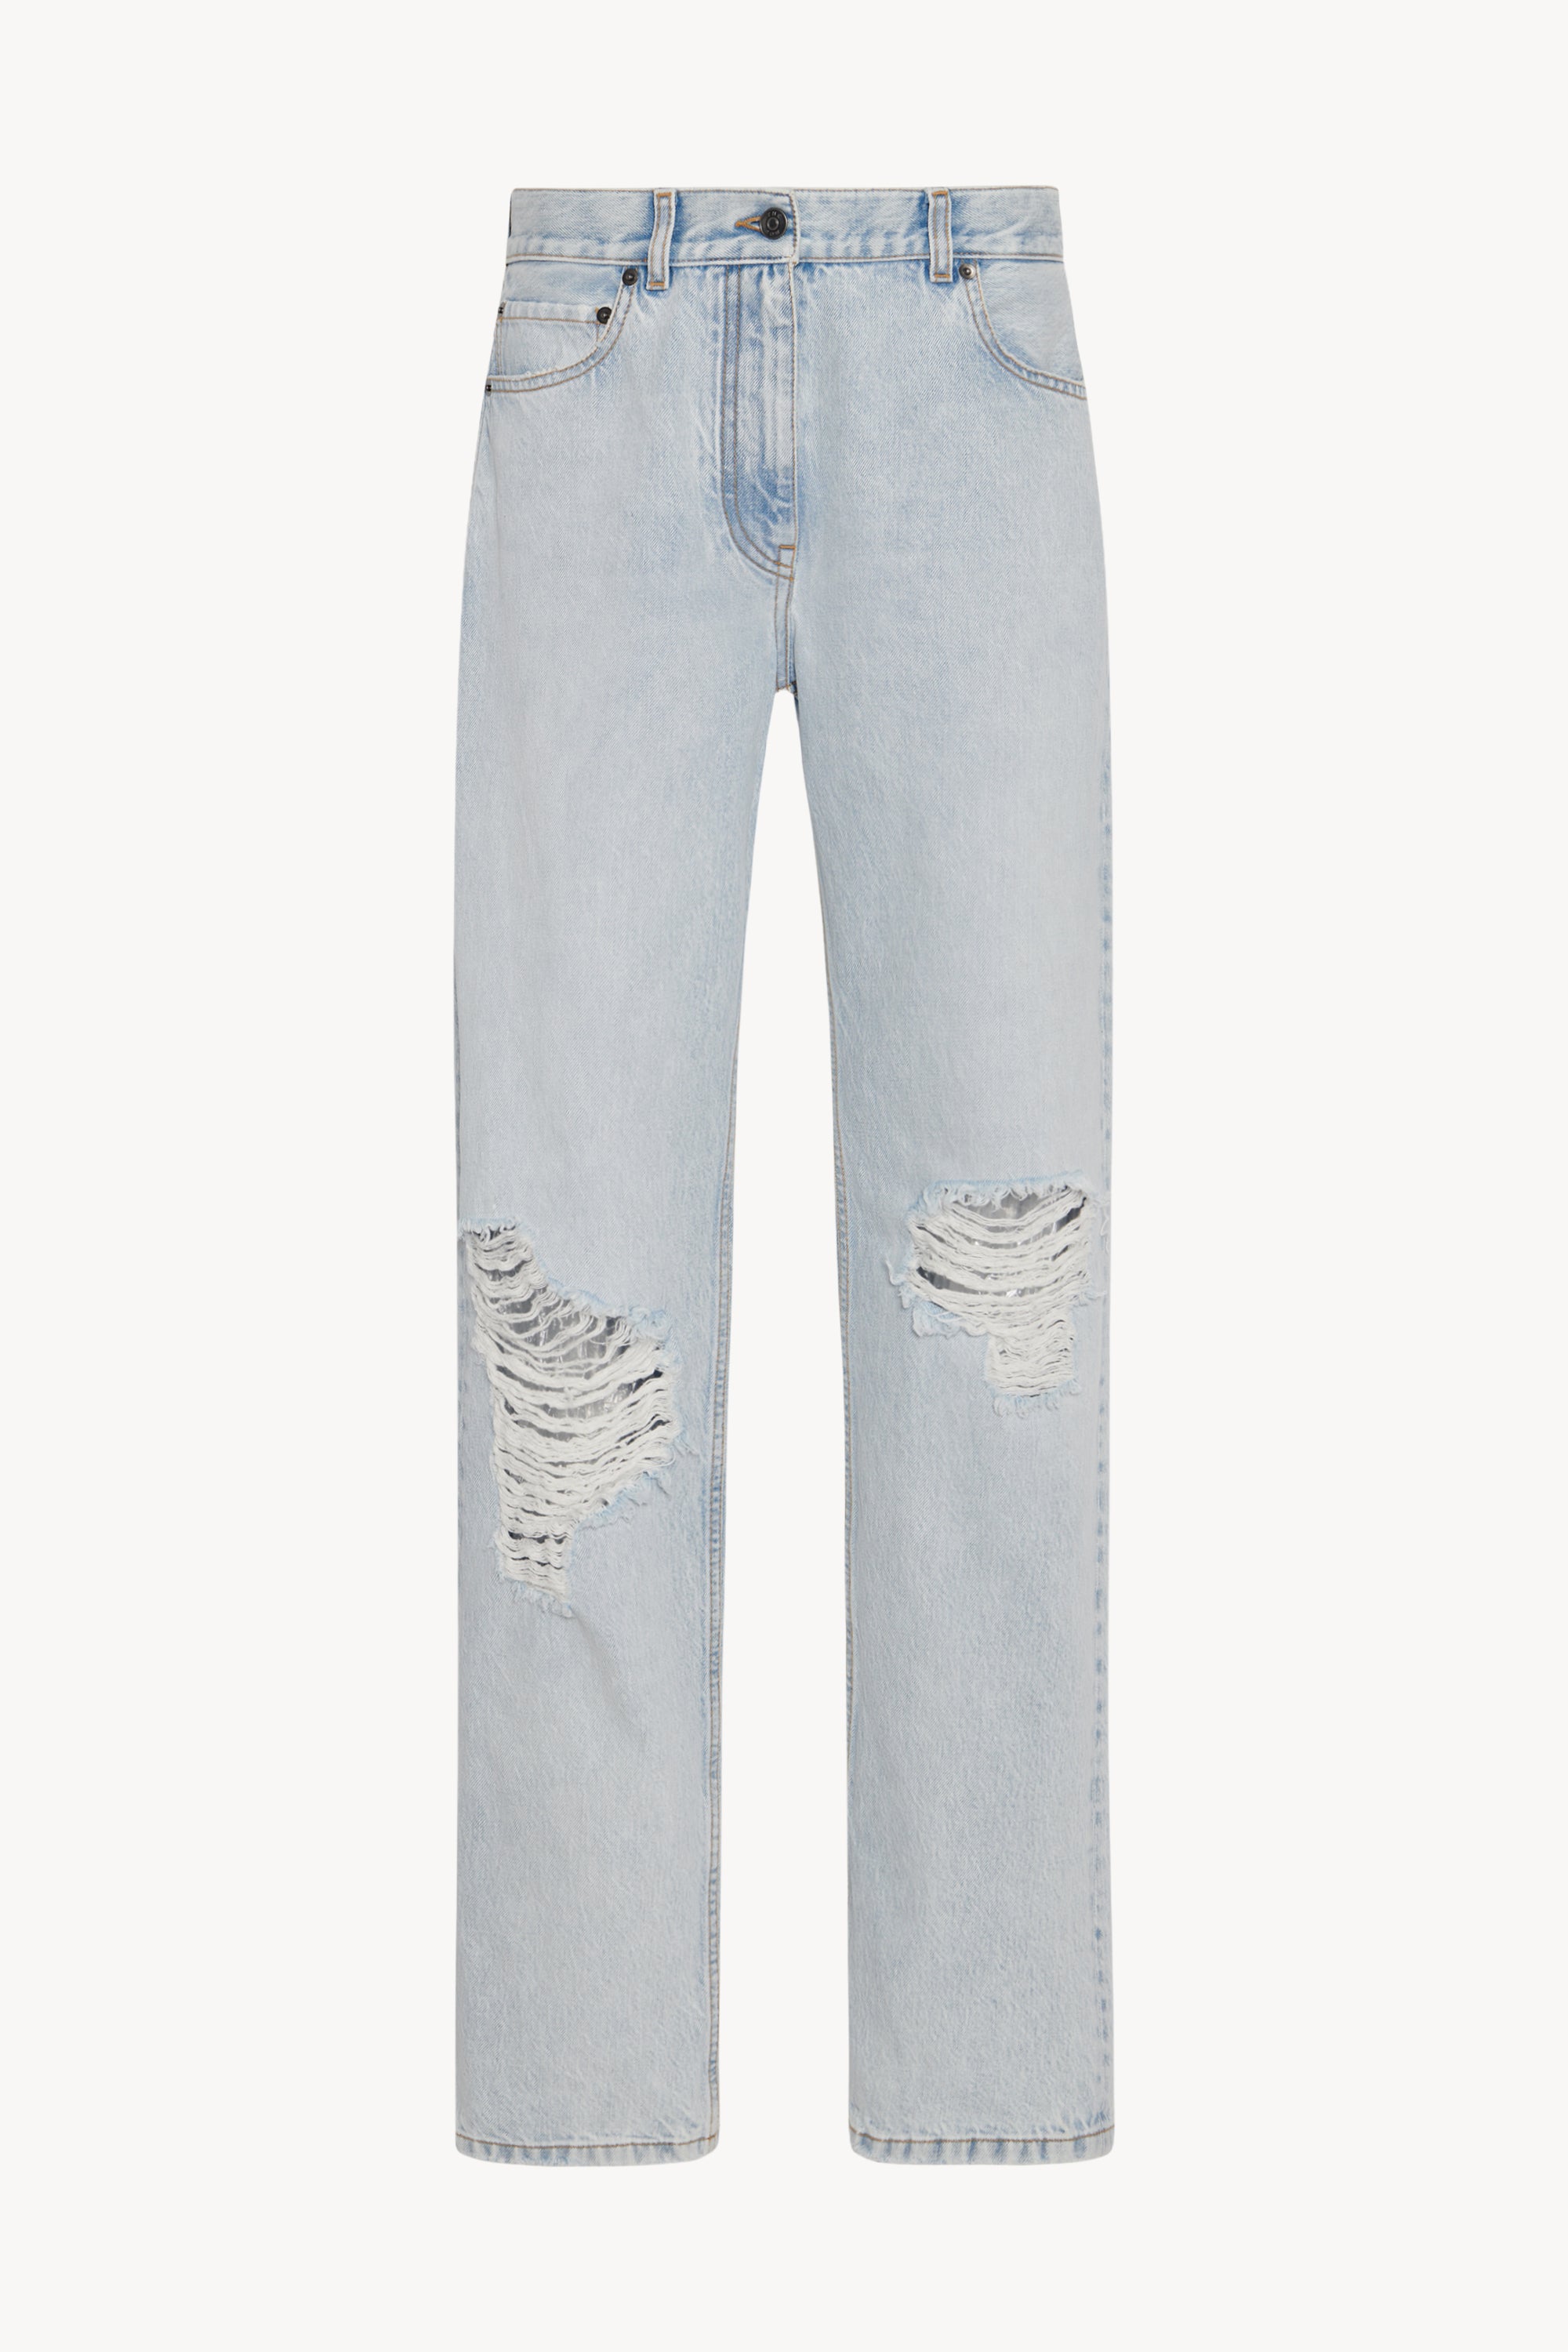 AREA Flared & Bell-Bottom Pants for Women - Shop Now at Farfetch Canada